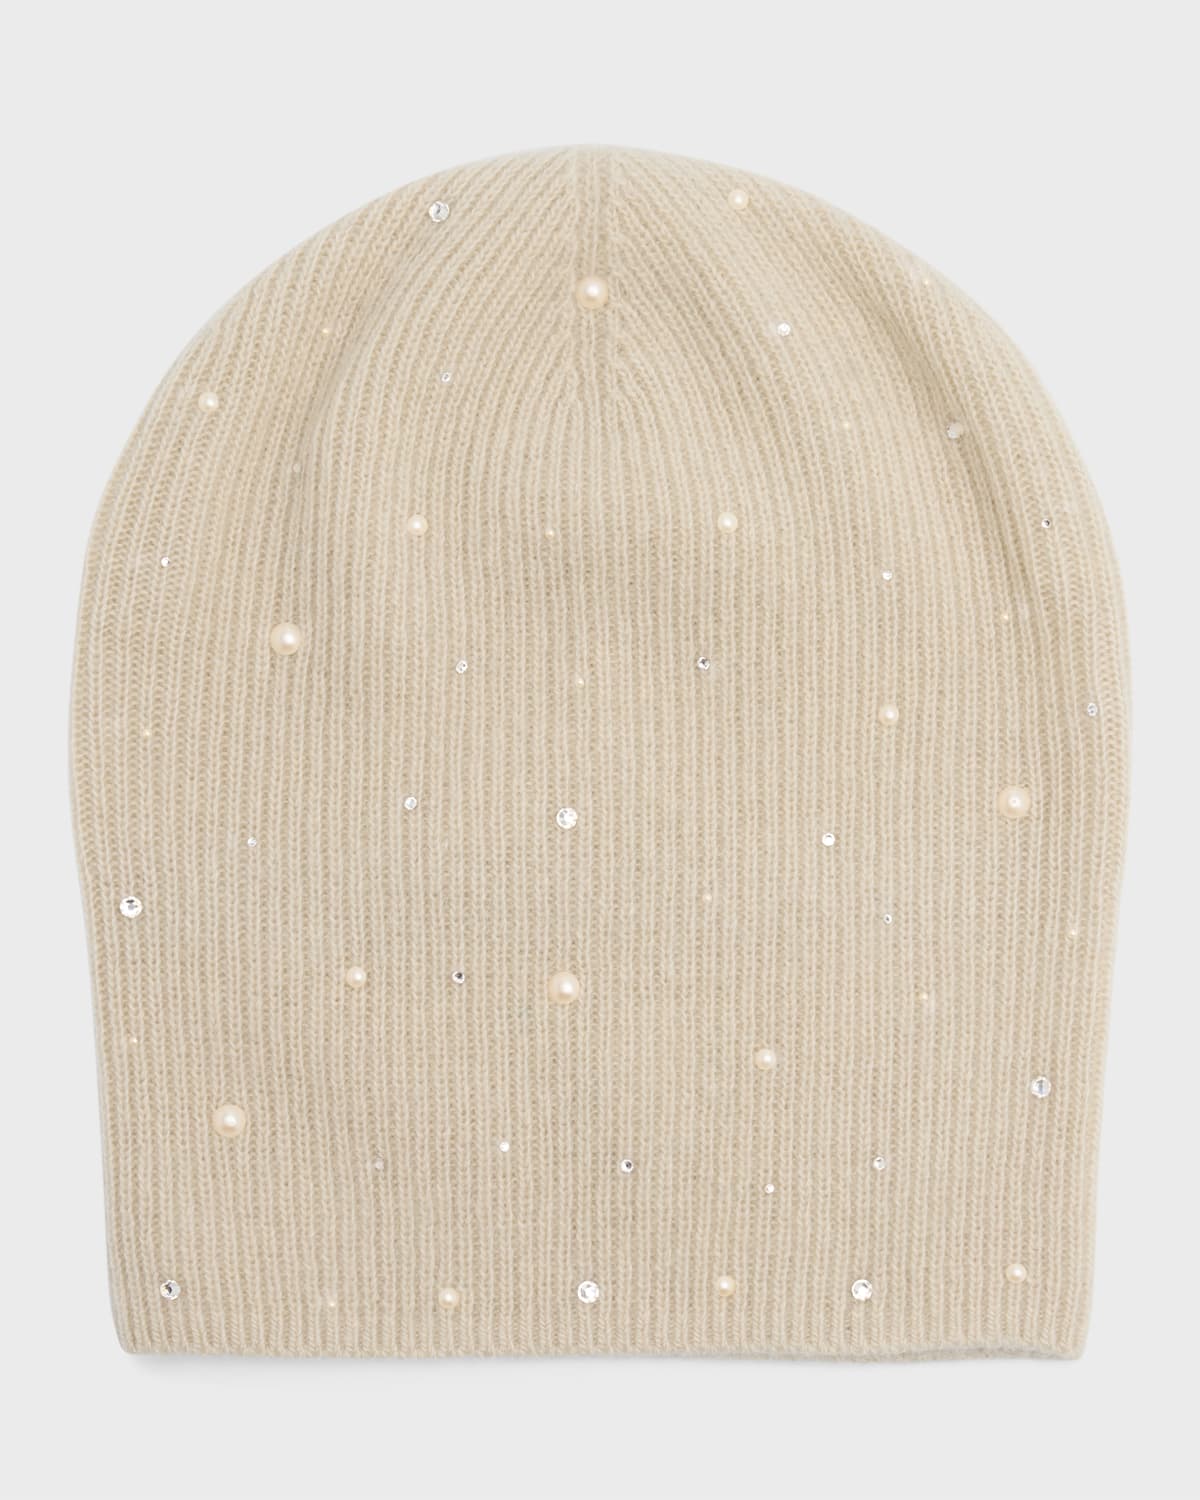 Embellished Slouchy Cashmere Beanie